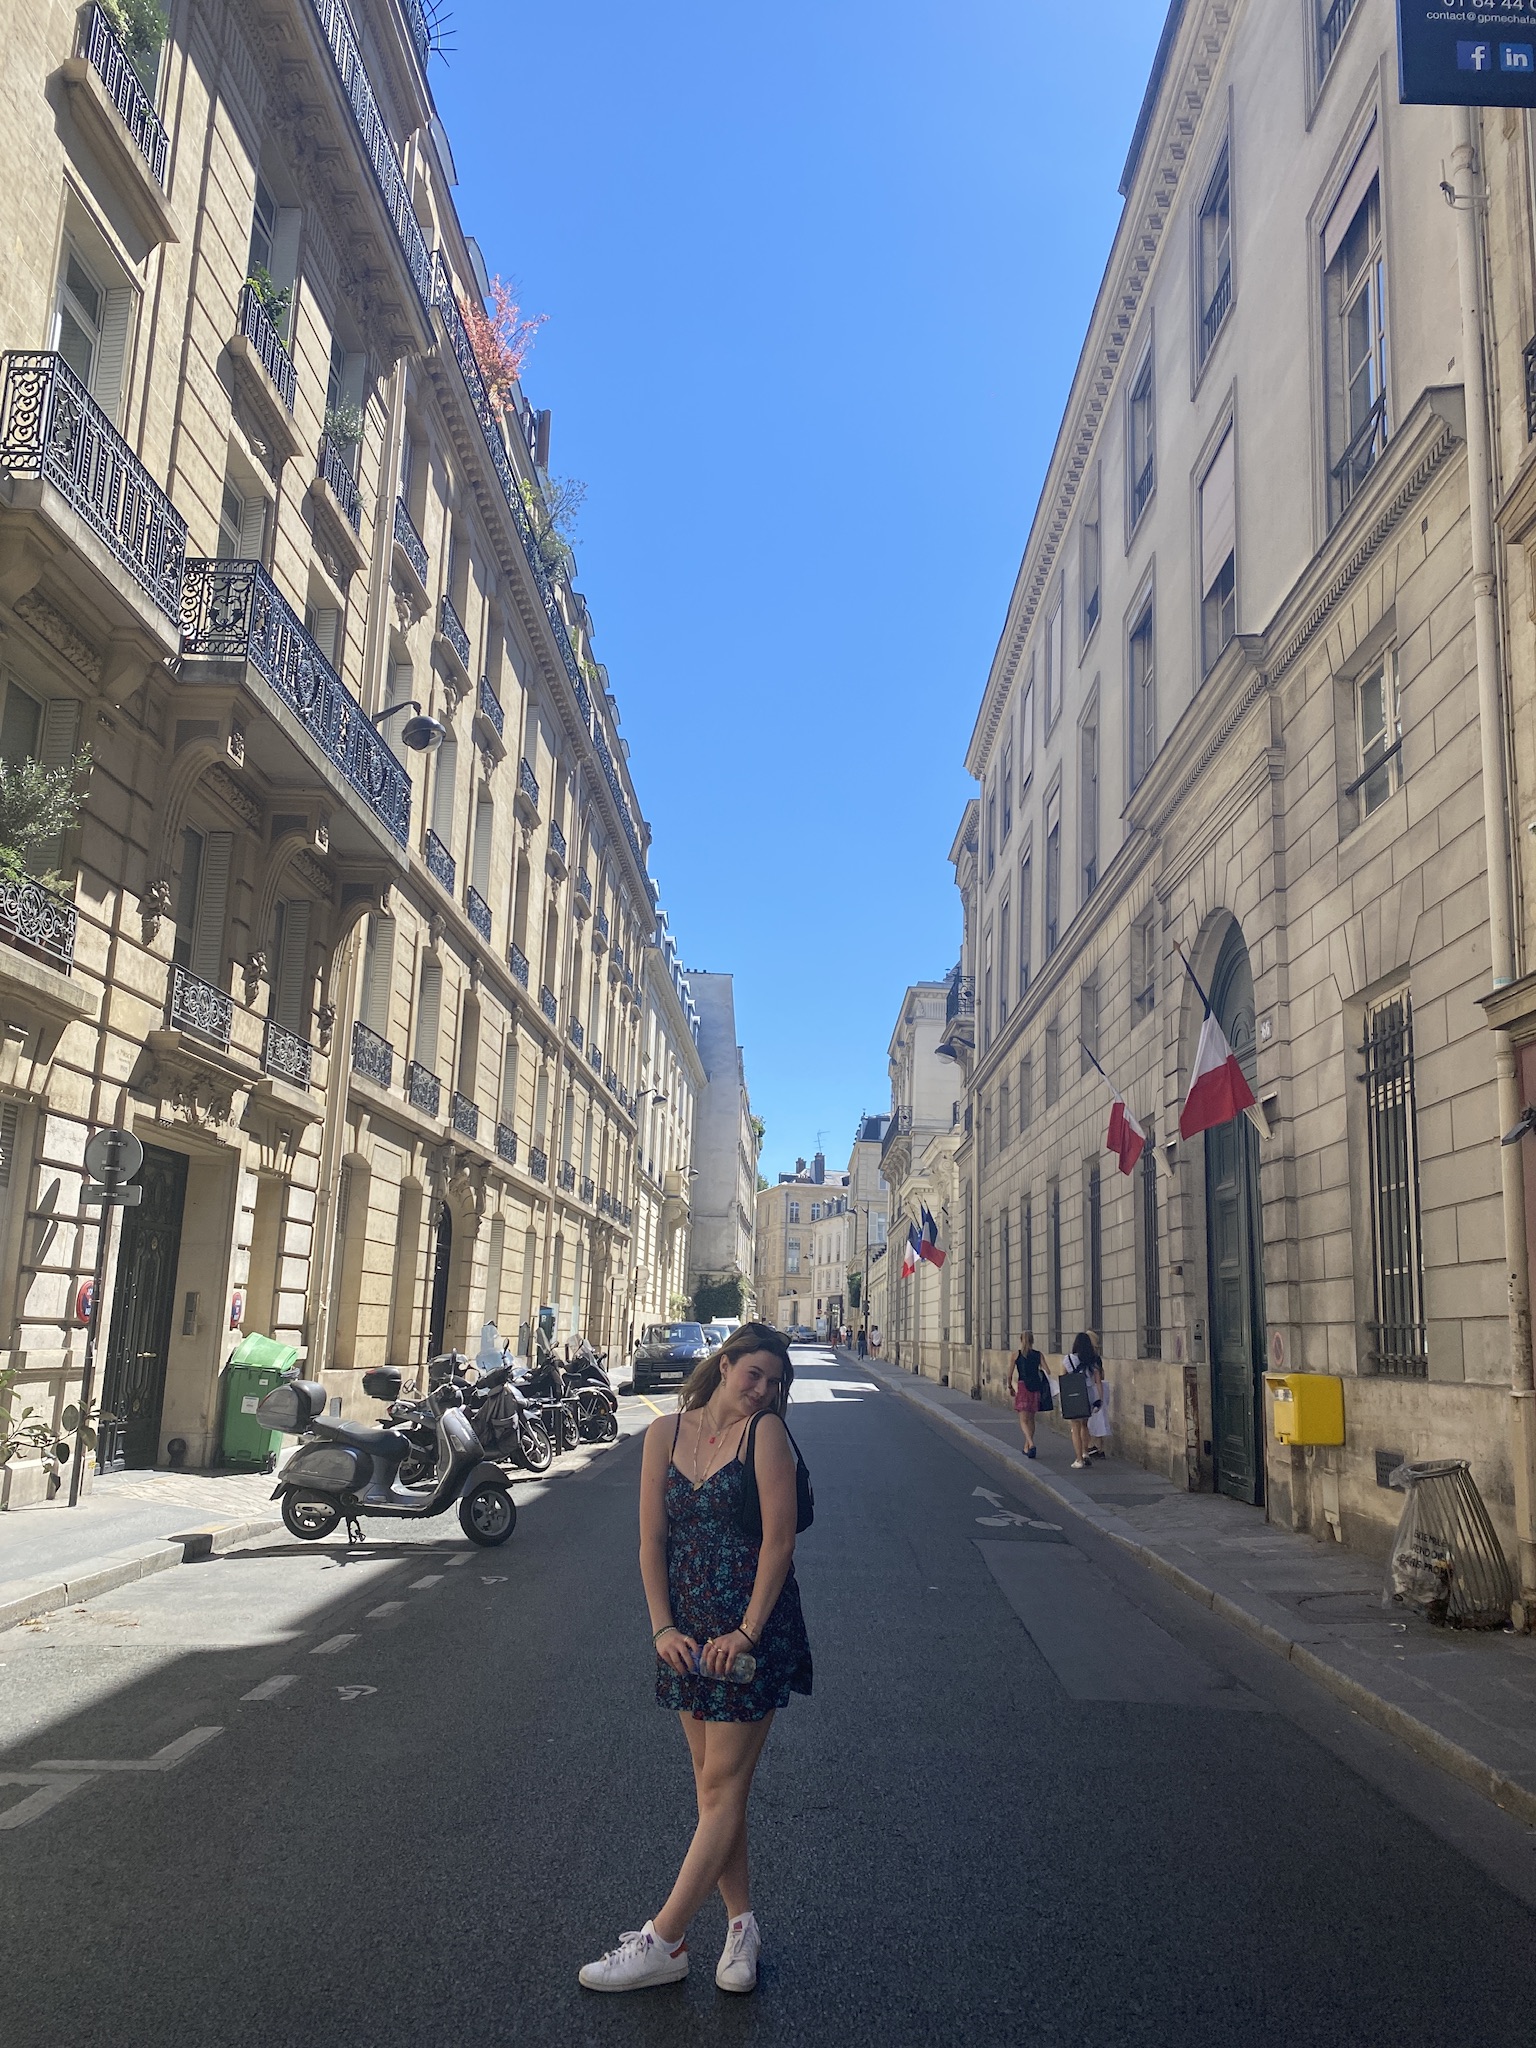 Wandering the streets of Paris